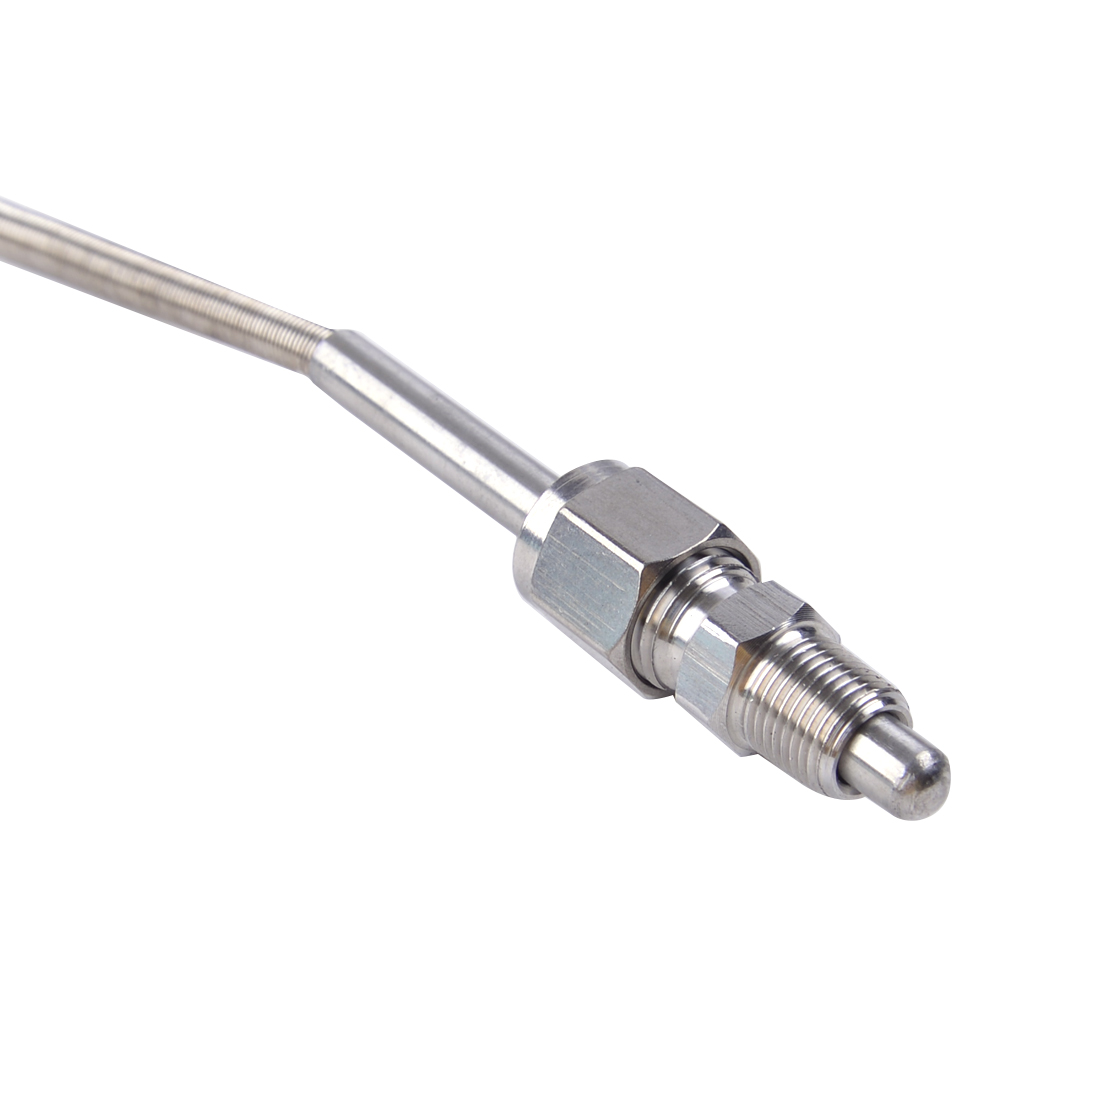 Stainless Steel Probe Mini K-Type Connector Thermocouple 1/8inch NPT Thread EGT